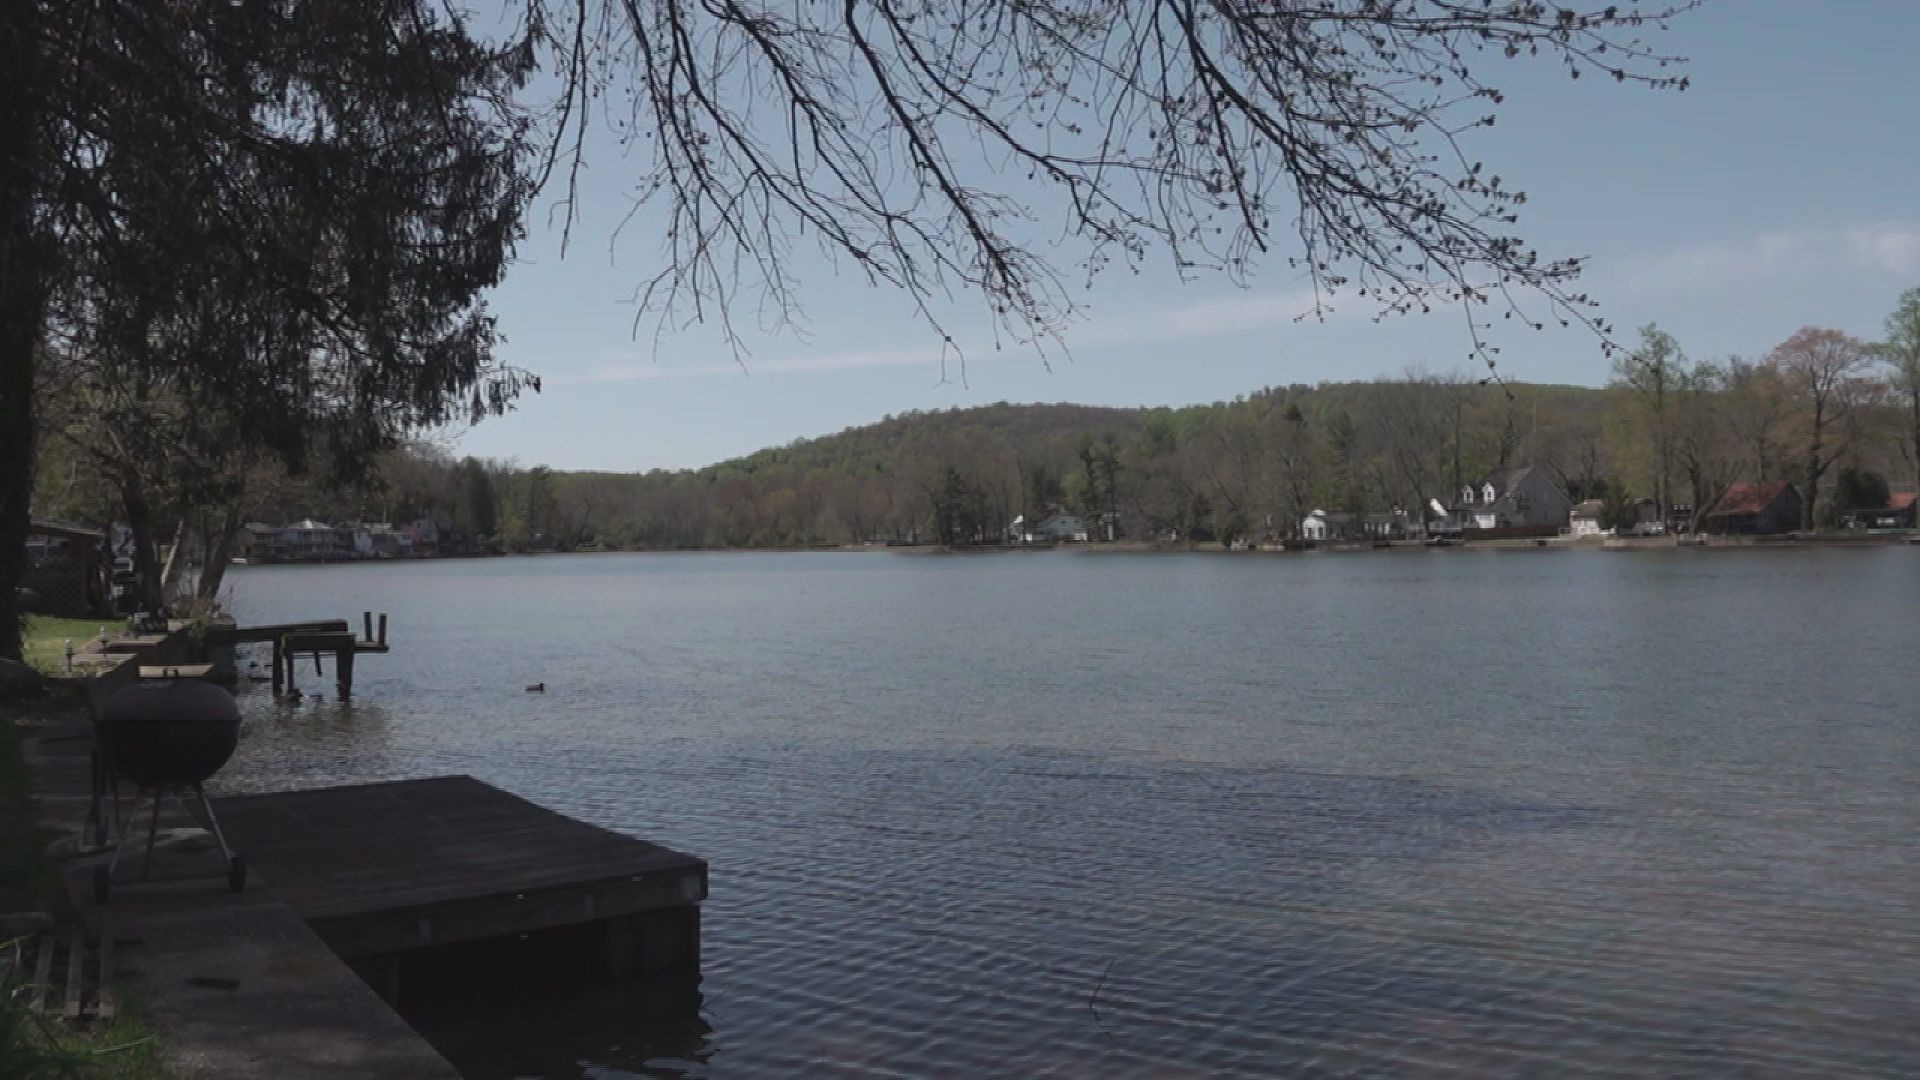 Residents and leaders of the private Fairview Township community have the same goal: saving the lake. However, their opinions differ on how to do it.